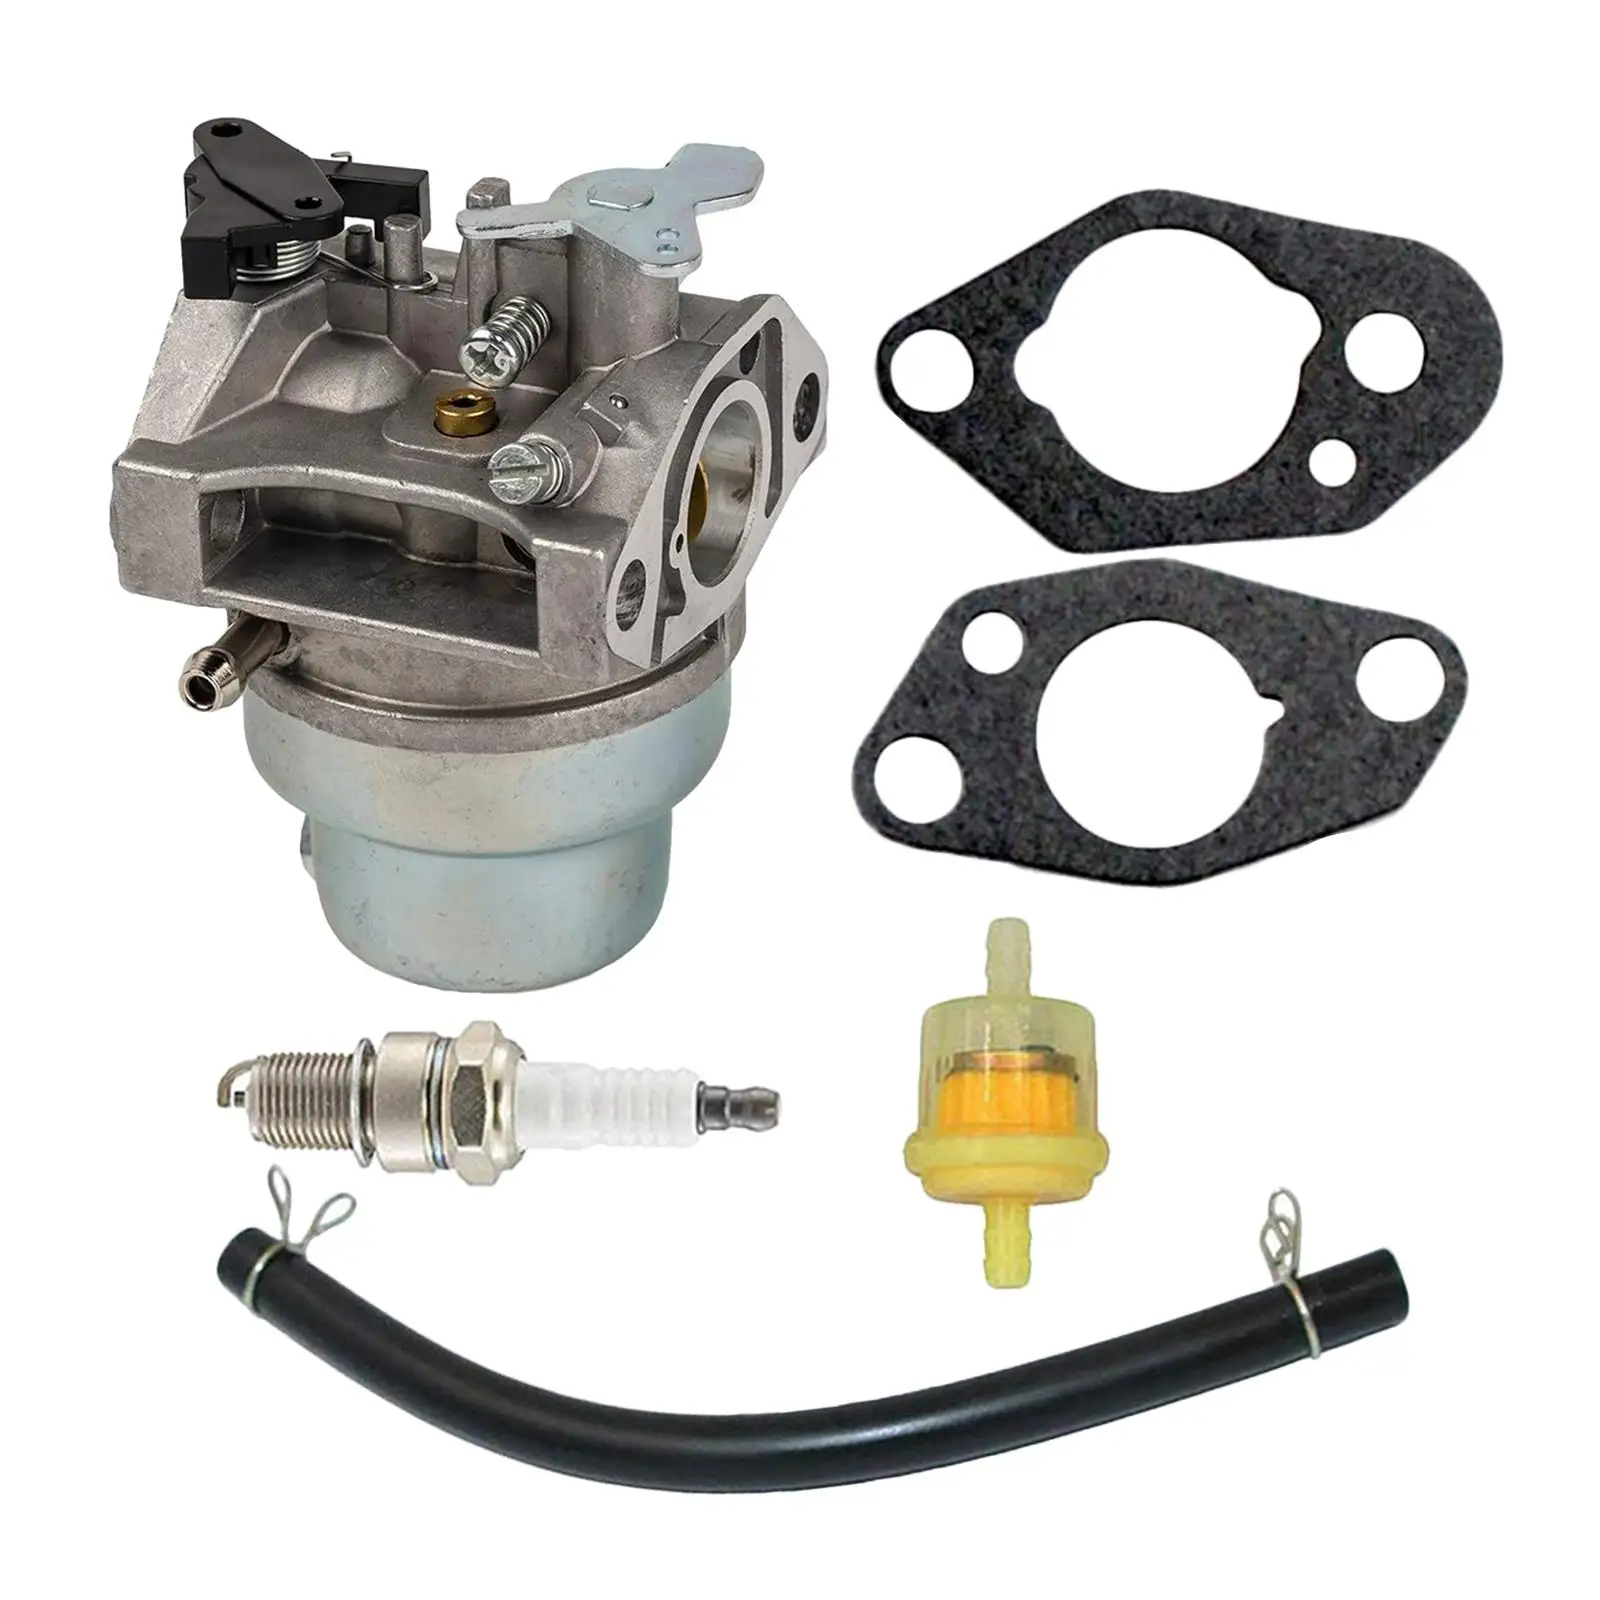 Carburetor GCV160 Direct Replaces Fit for HRT216 Mower Professional